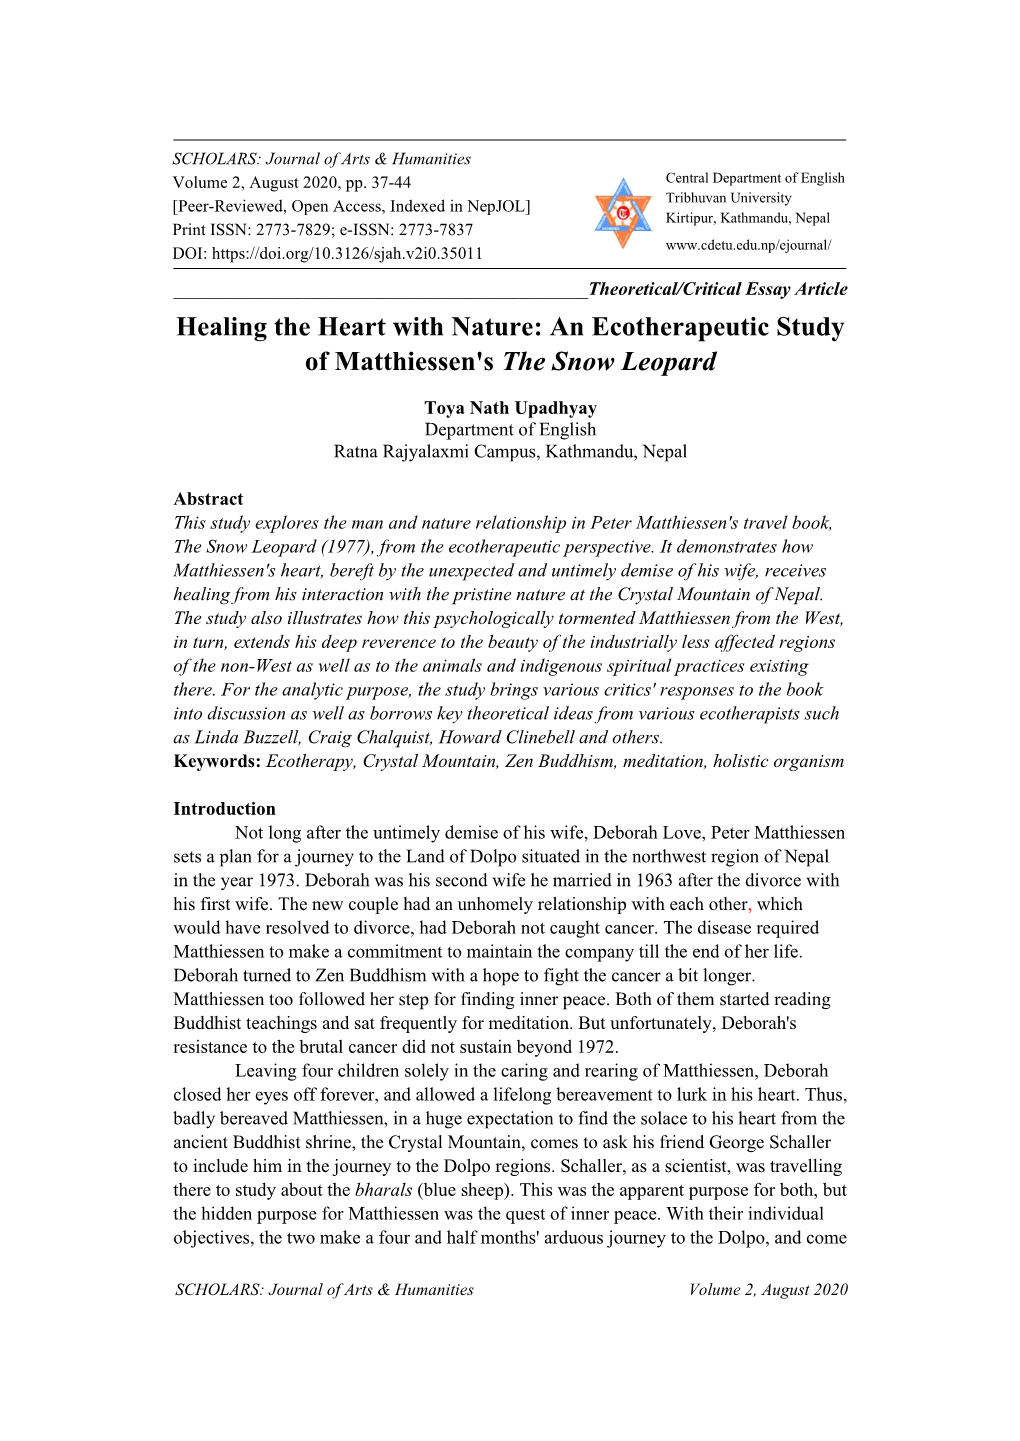 Healing the Heart with Nature: an Ecotherapeutic Study 37 SCHOLARS: Journal of Arts & Humanities Volume 2, August 2020, Pp